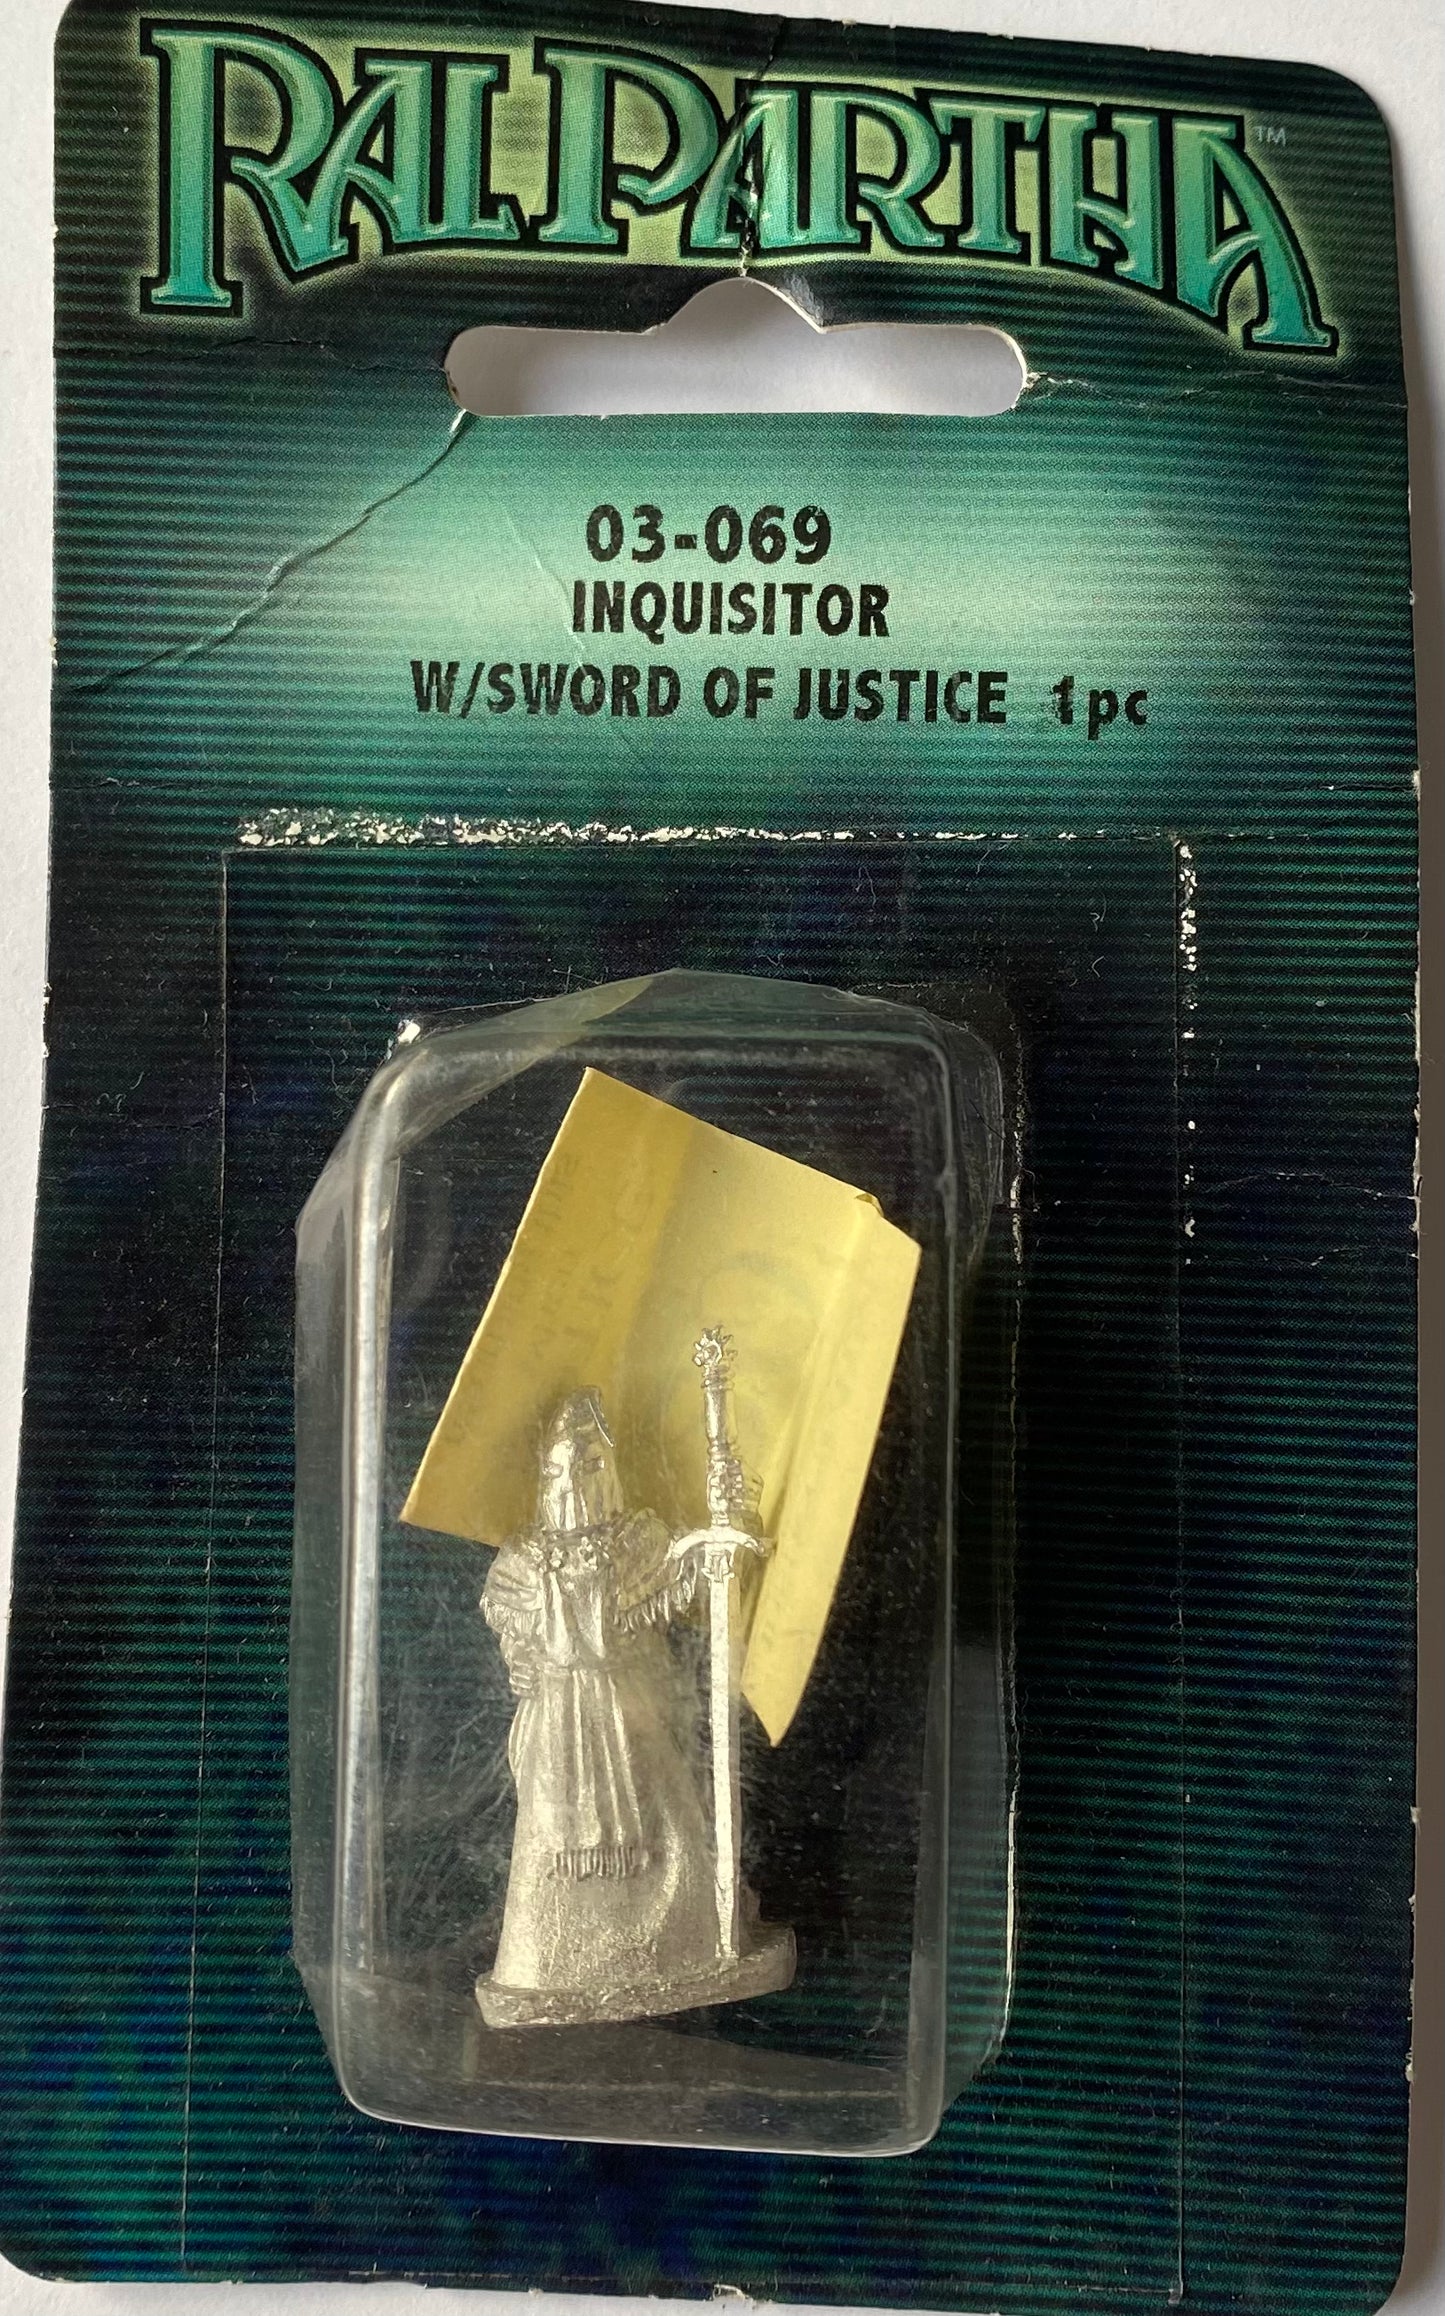 Ral Partha 03-069 Inquisitor w/sword of justice